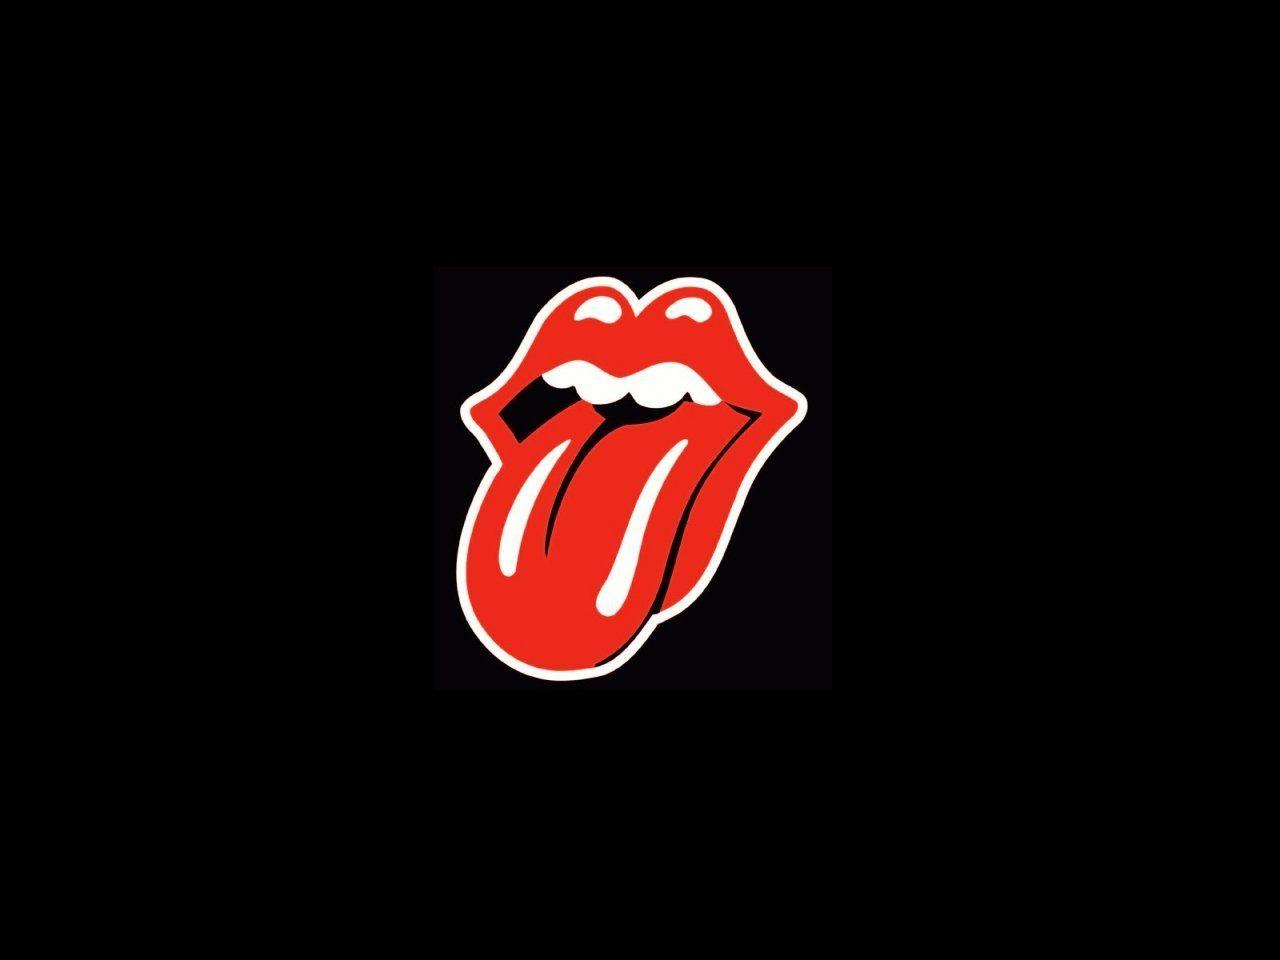 The Rolling Stones wallpapers